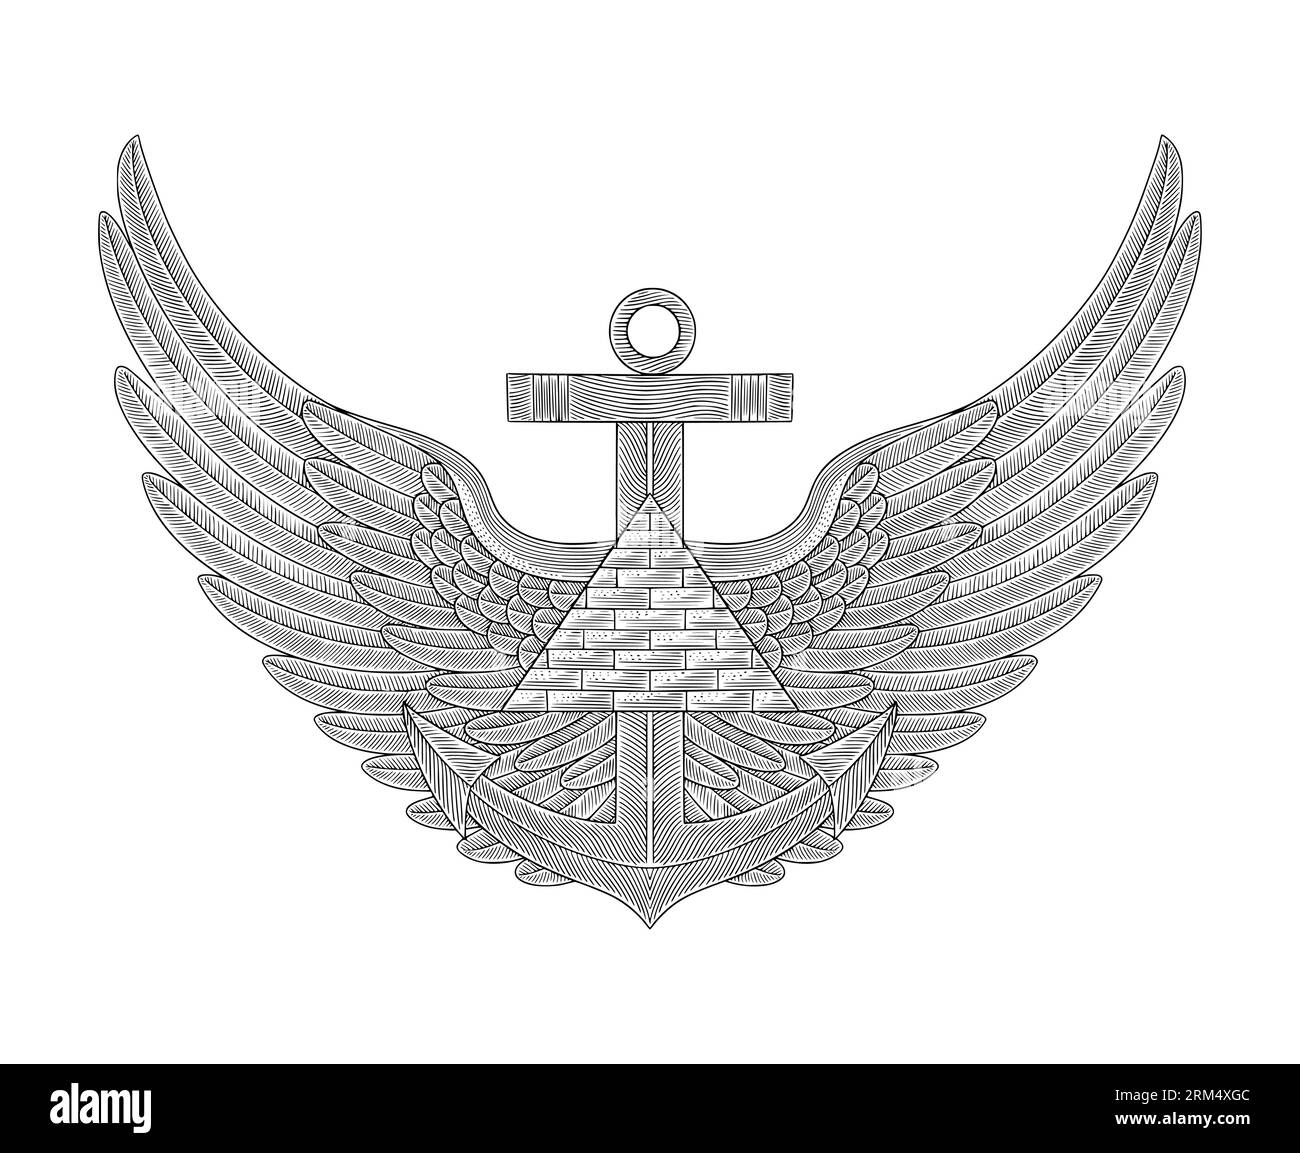 Anchor with pyramid and wings, vintage engraving drawing style vector illustration Stock Vector